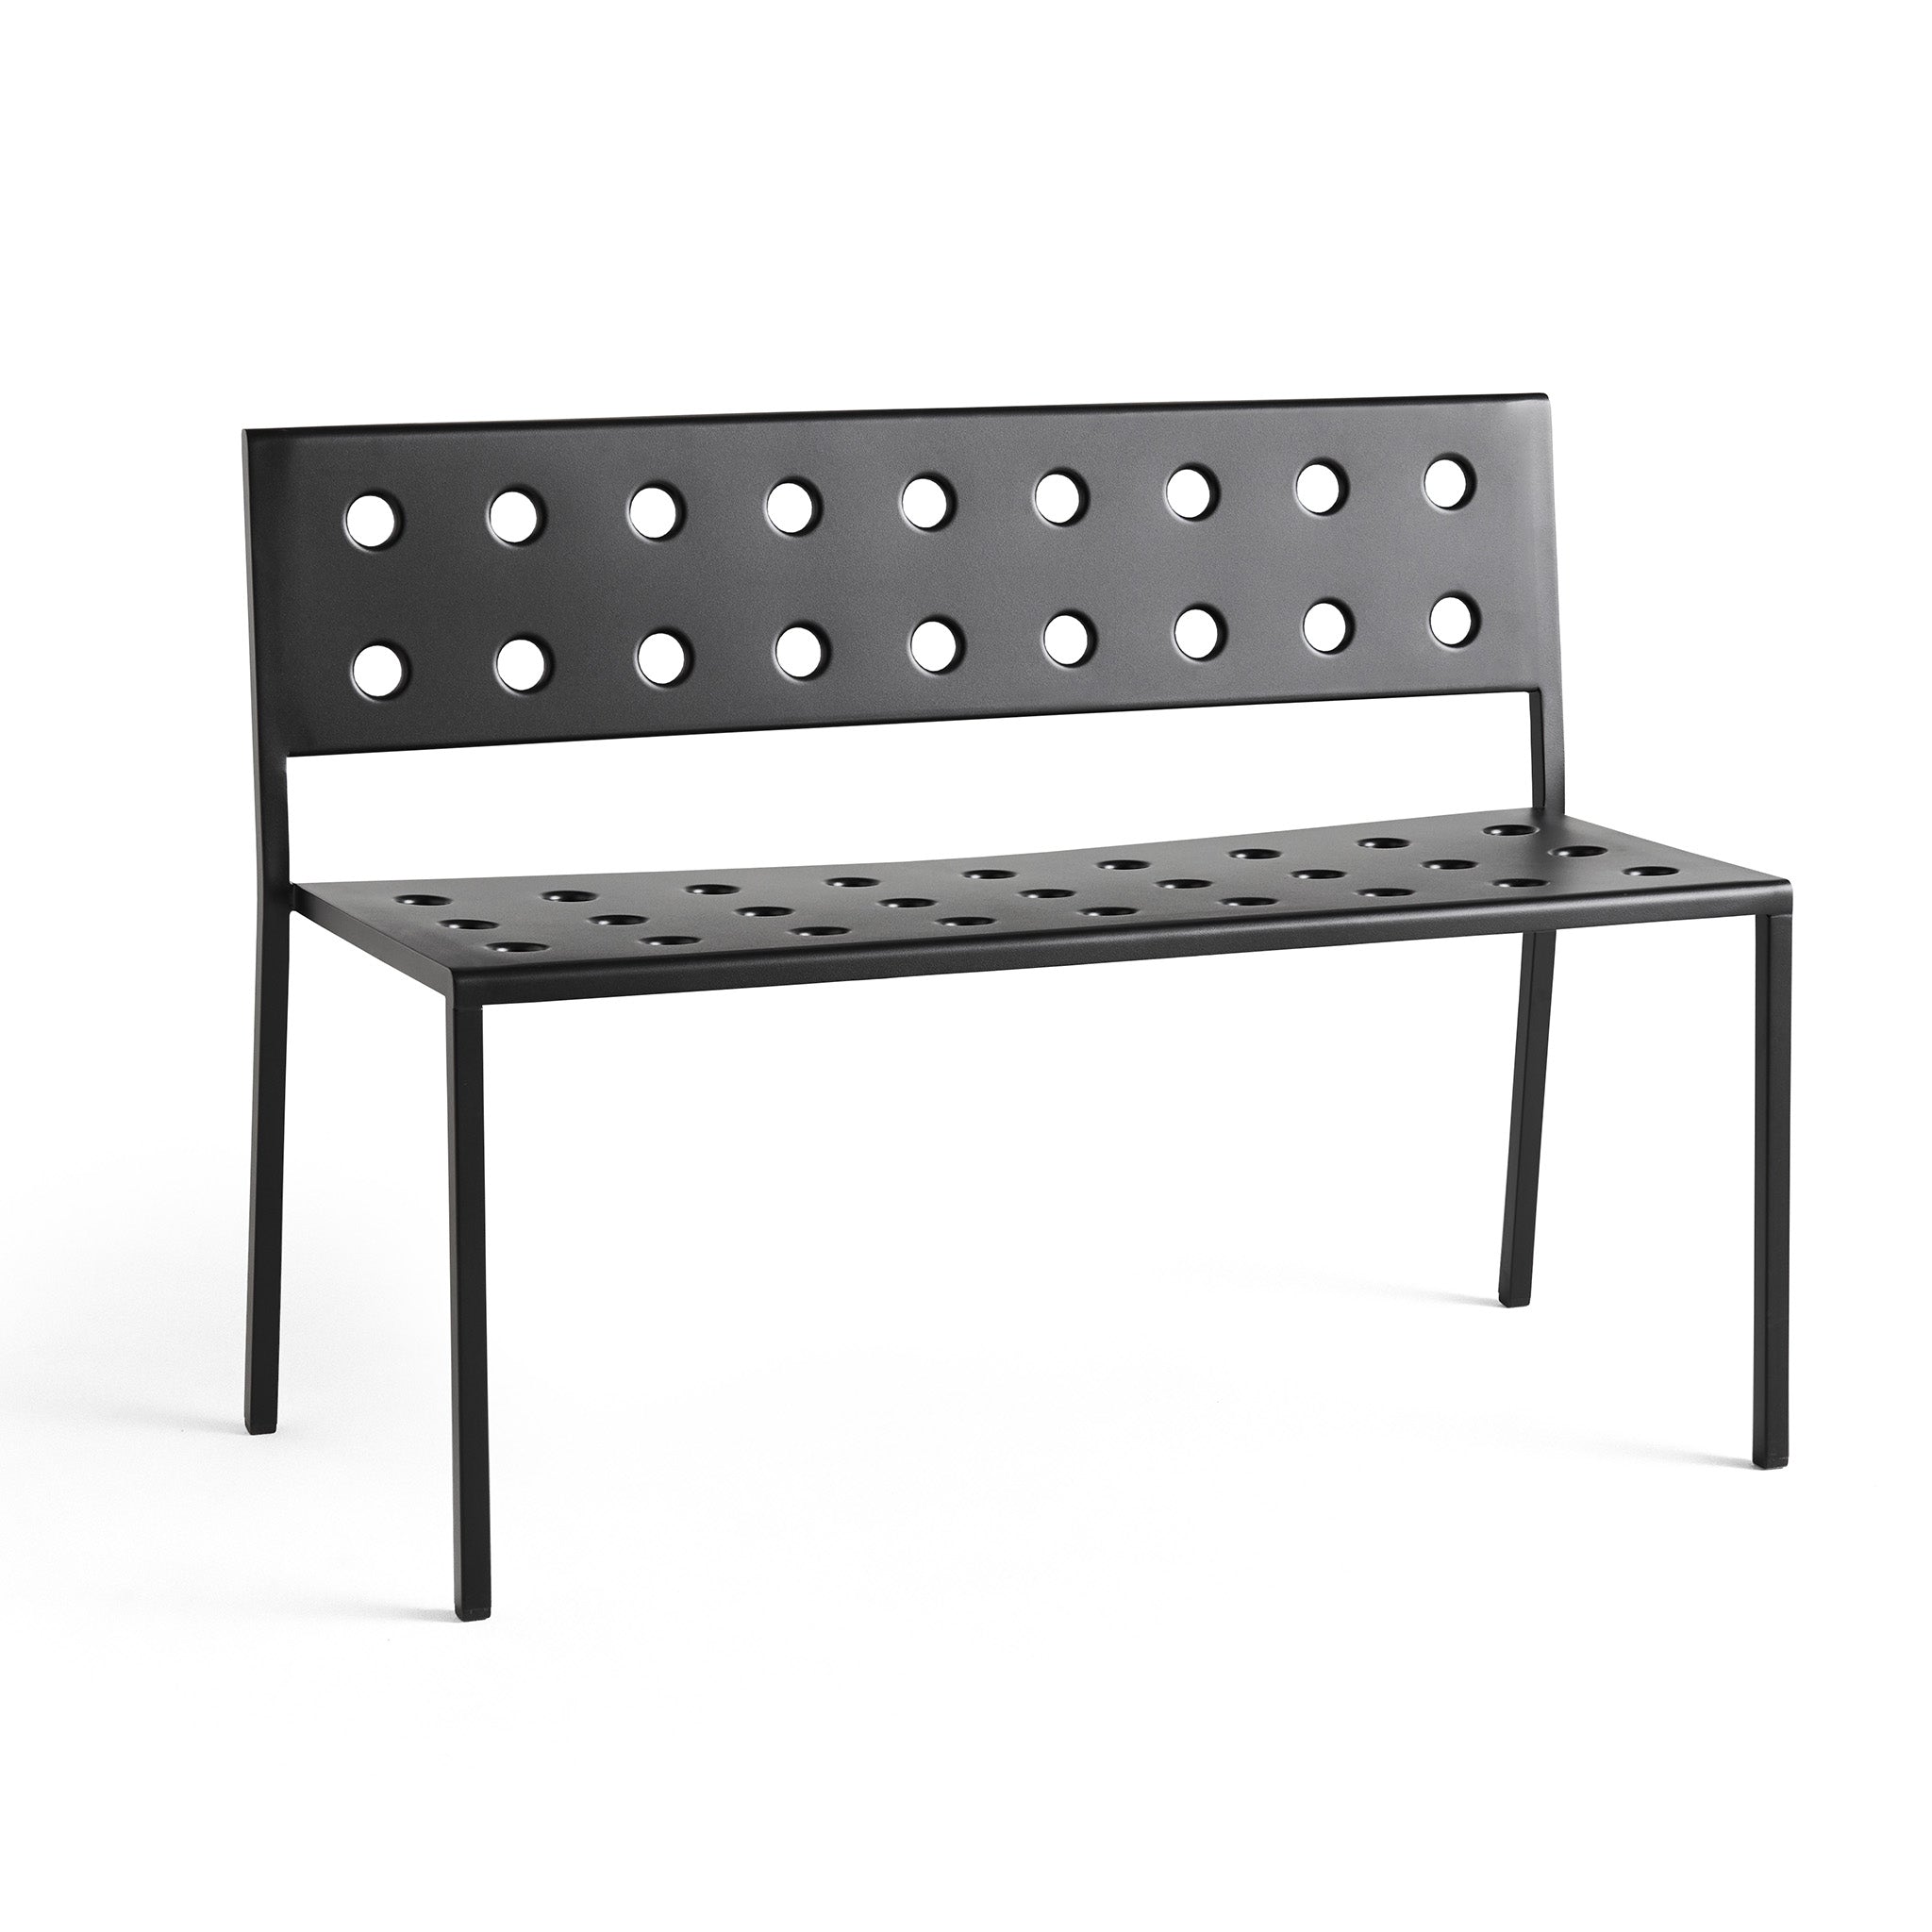 Balcony Dining Bench By Ronan and Erwan Bouroullec for Hay